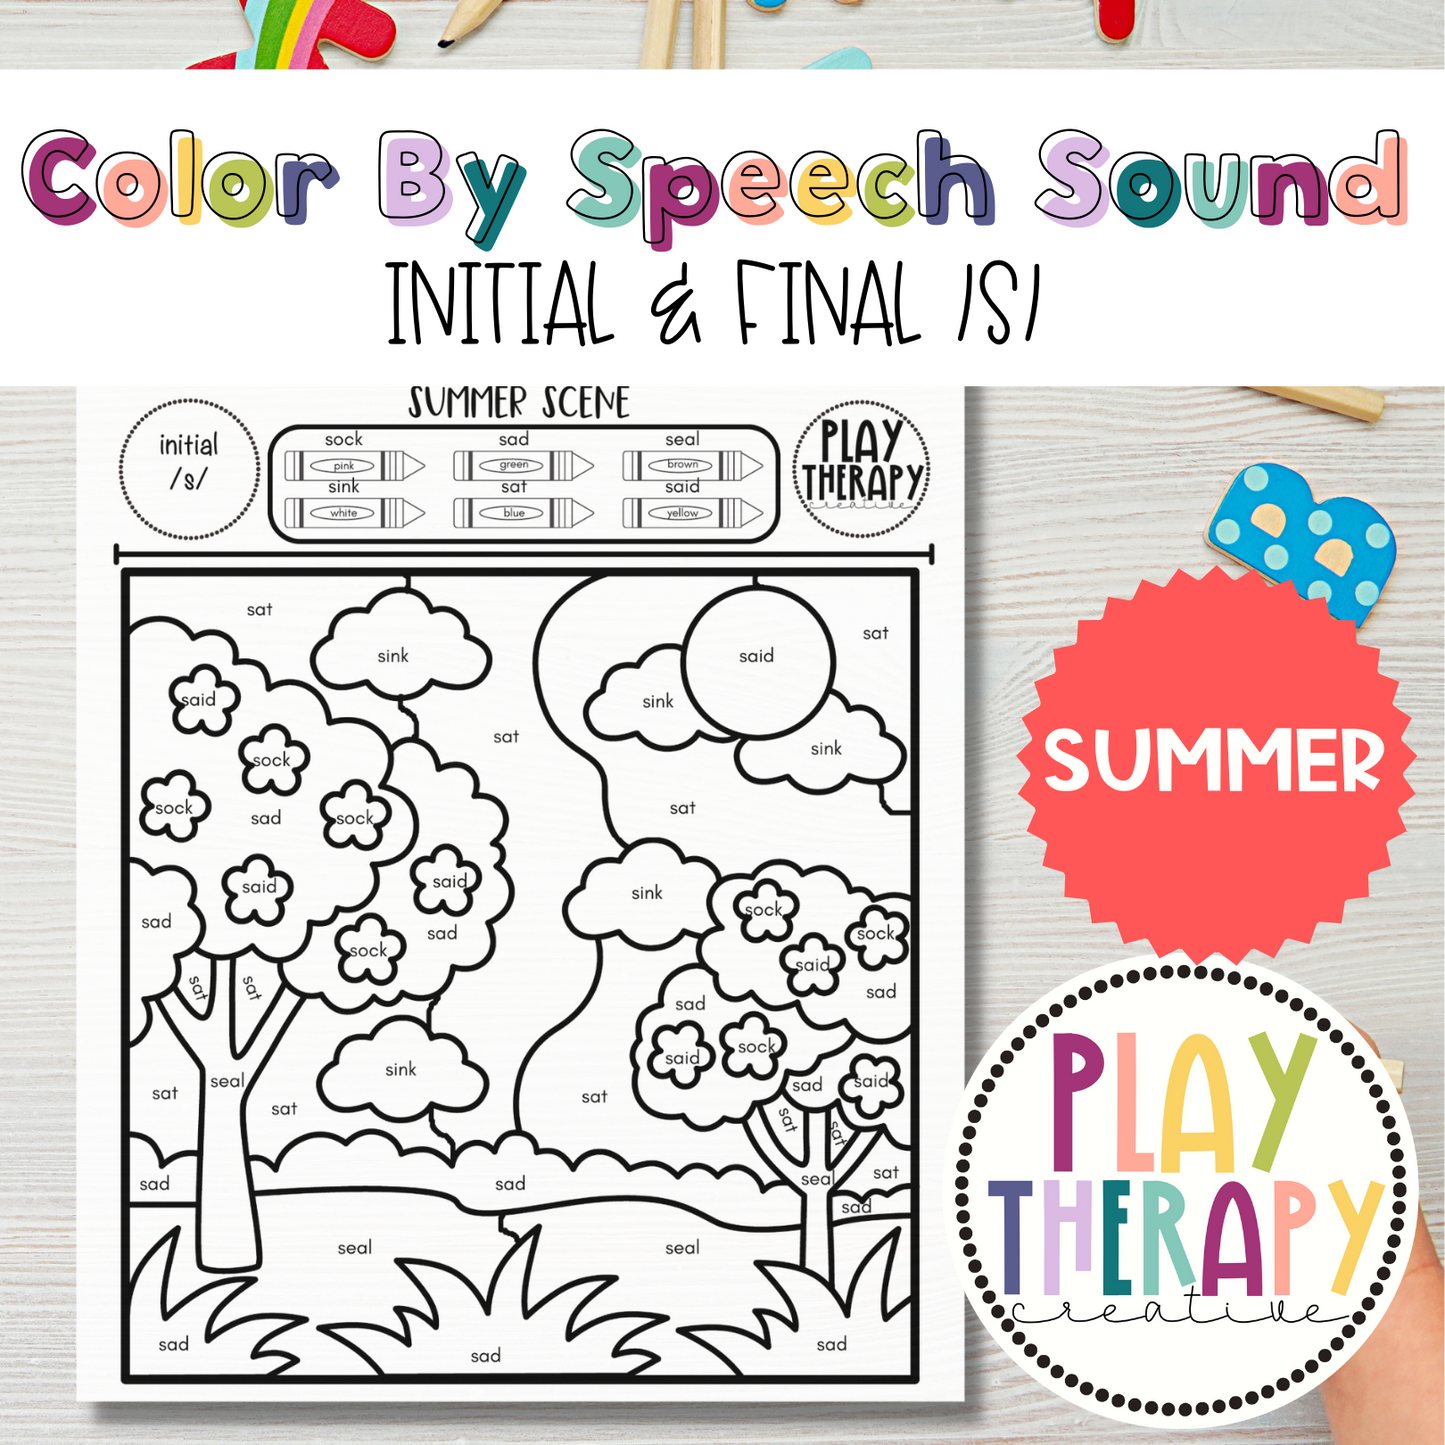 /s/ Sound Summer Themed Color-by-Speech-Sounds for Speech Therapy